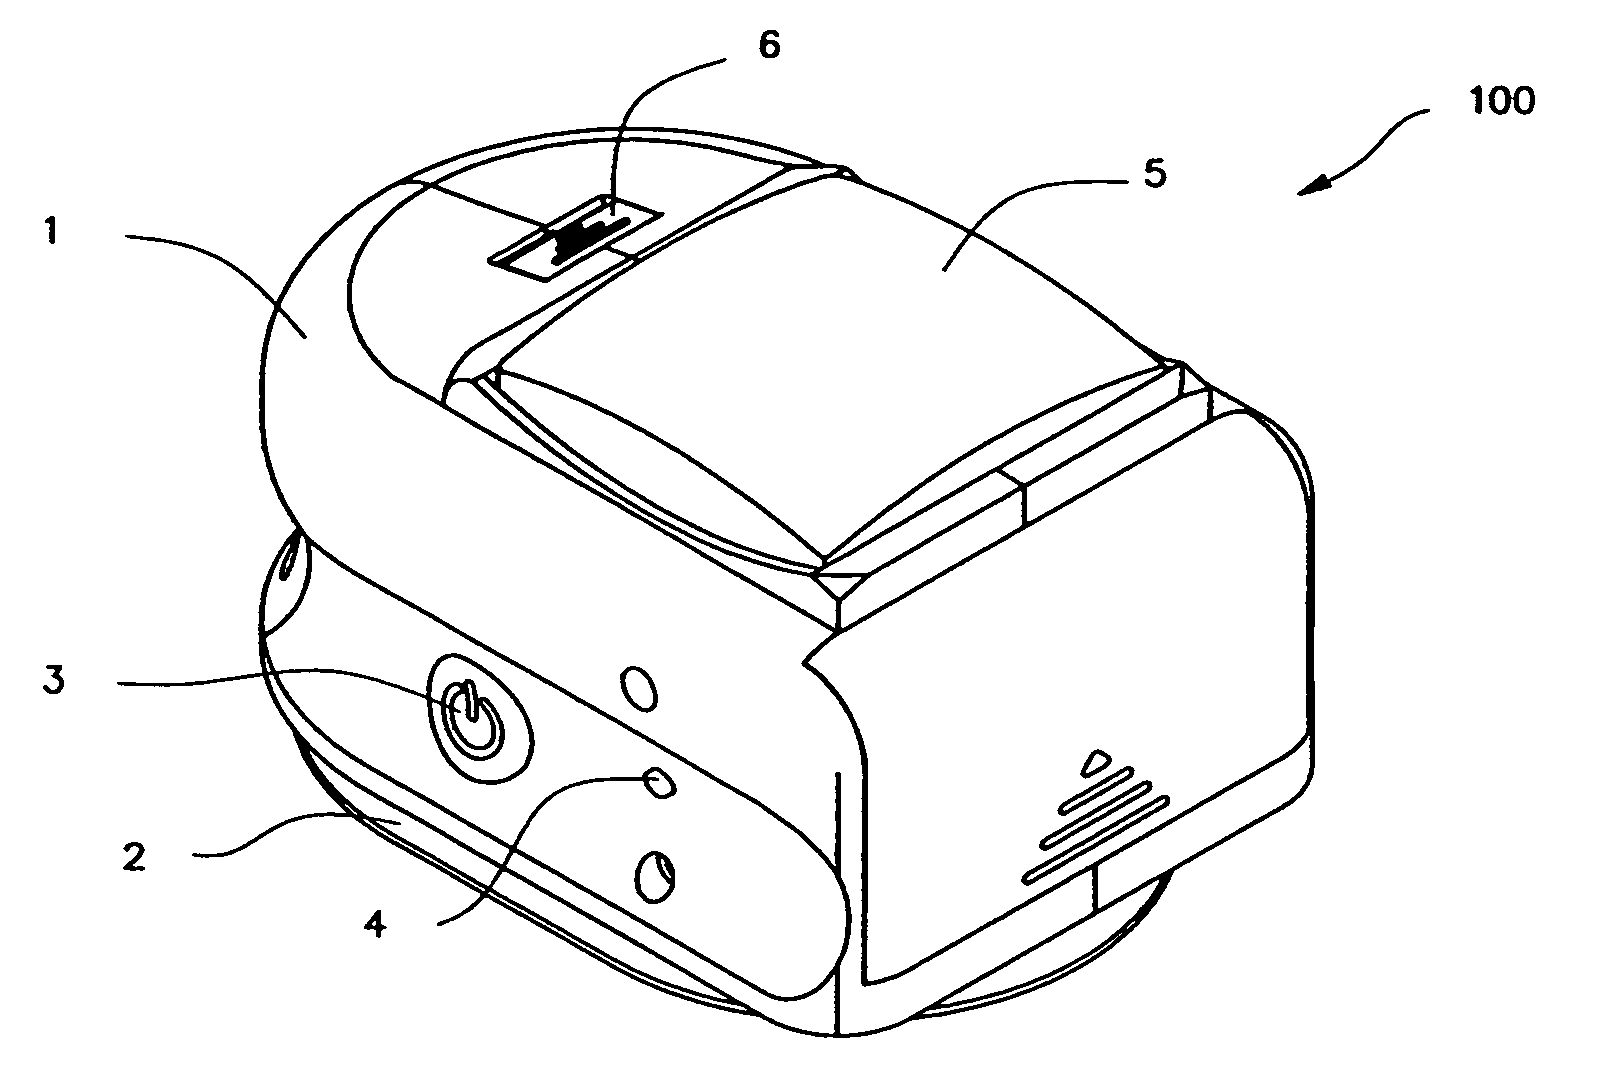 Device with a suction cup for supporting and mounting articles to a surface